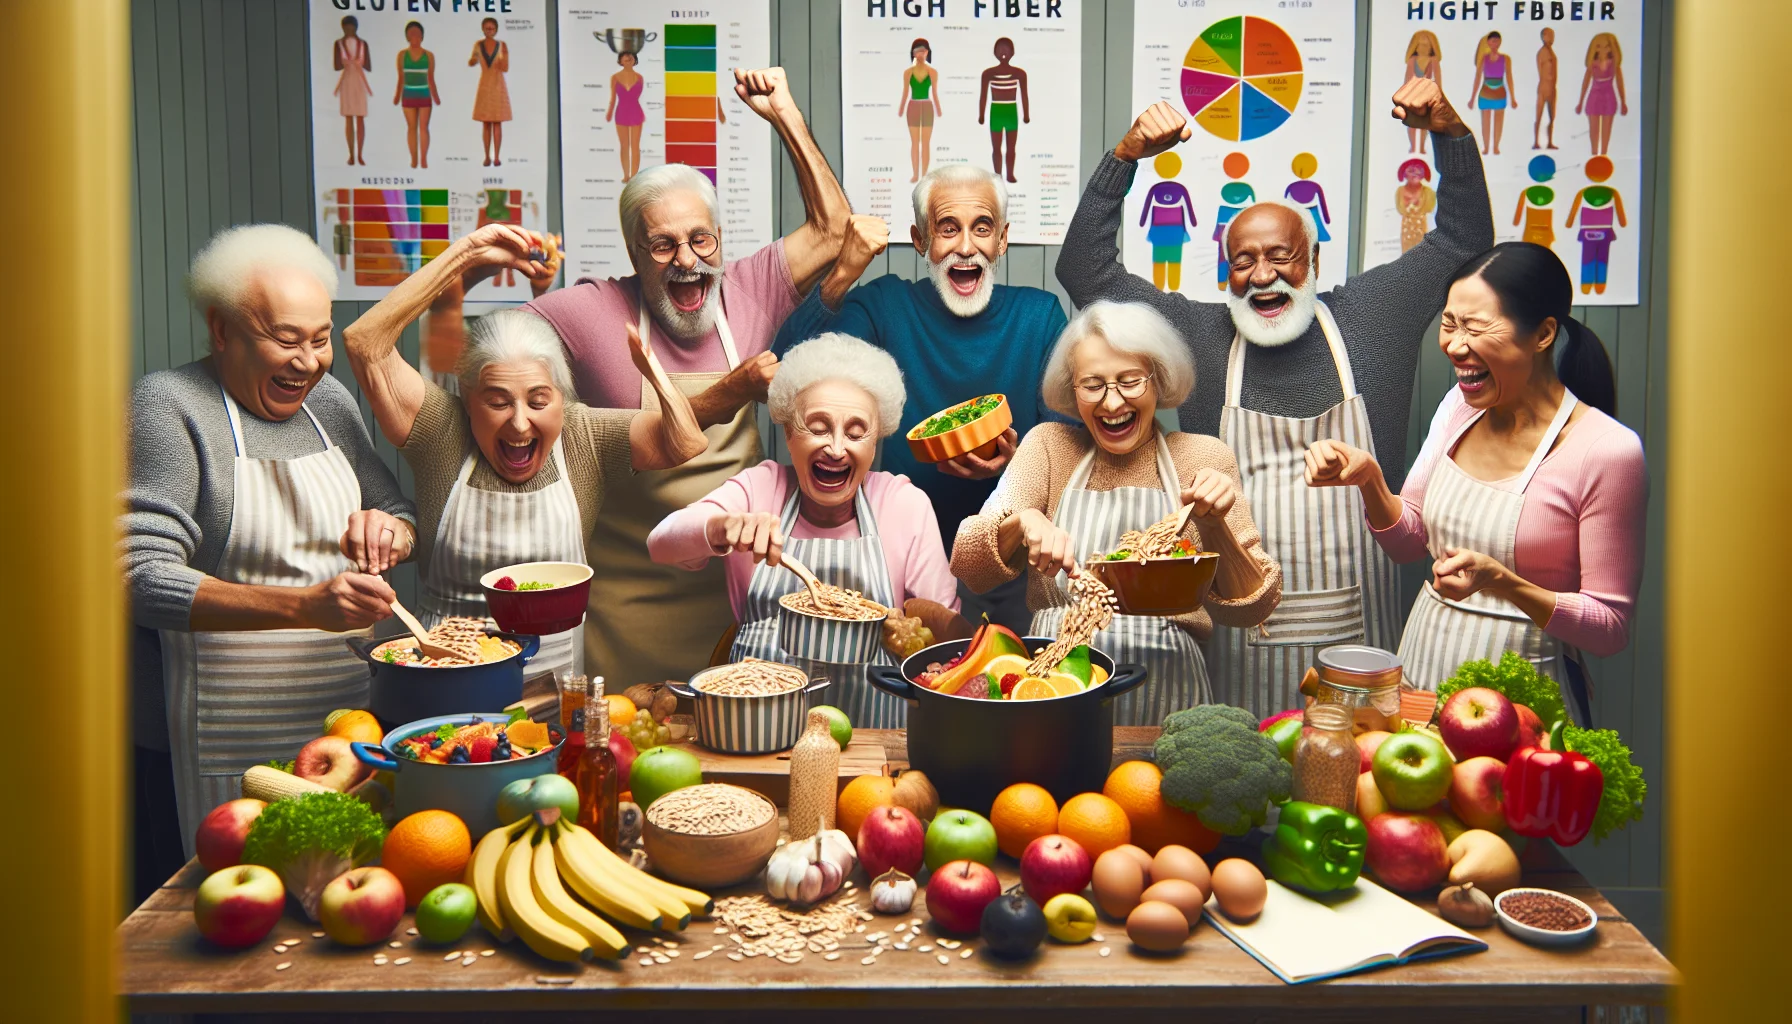 Create a humorous yet realistic scenario featuring a variety of gluten-free and high fiber foods. Imagine that there is a group of elderly friends, with each person from a different descent - perhaps one Caucasian man, one Hispanic woman, one Black man, one Middle-Eastern woman, one South Asian man, and one East Asian woman, all engaged in a lighthearted cooking contest. Each individual is enthusiastically preparing a dish, using a variety of vibrant-colored fruits and vegetables. The high fiber foods, piles of them around, are somehow stubbornly refusing to fit into cooking pots, leading to much laughter and fun. Surrounding them, colorful health and diet charts adorn the walls, adding to the health-focused atmosphere.